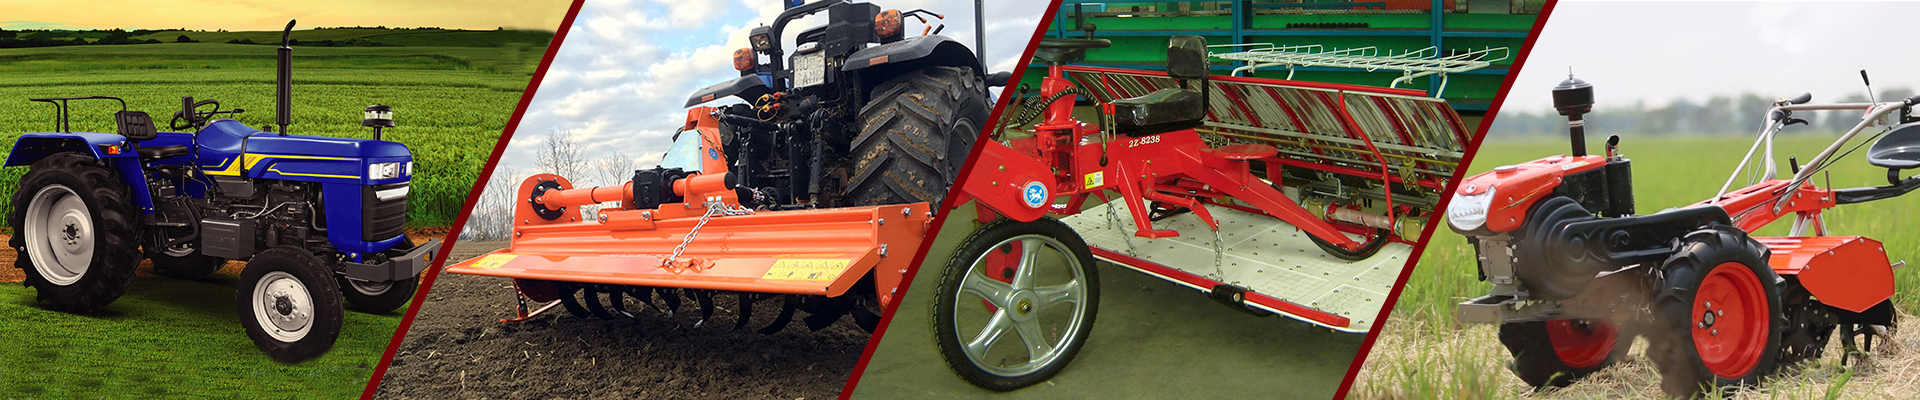 agriculture-equipment-industry